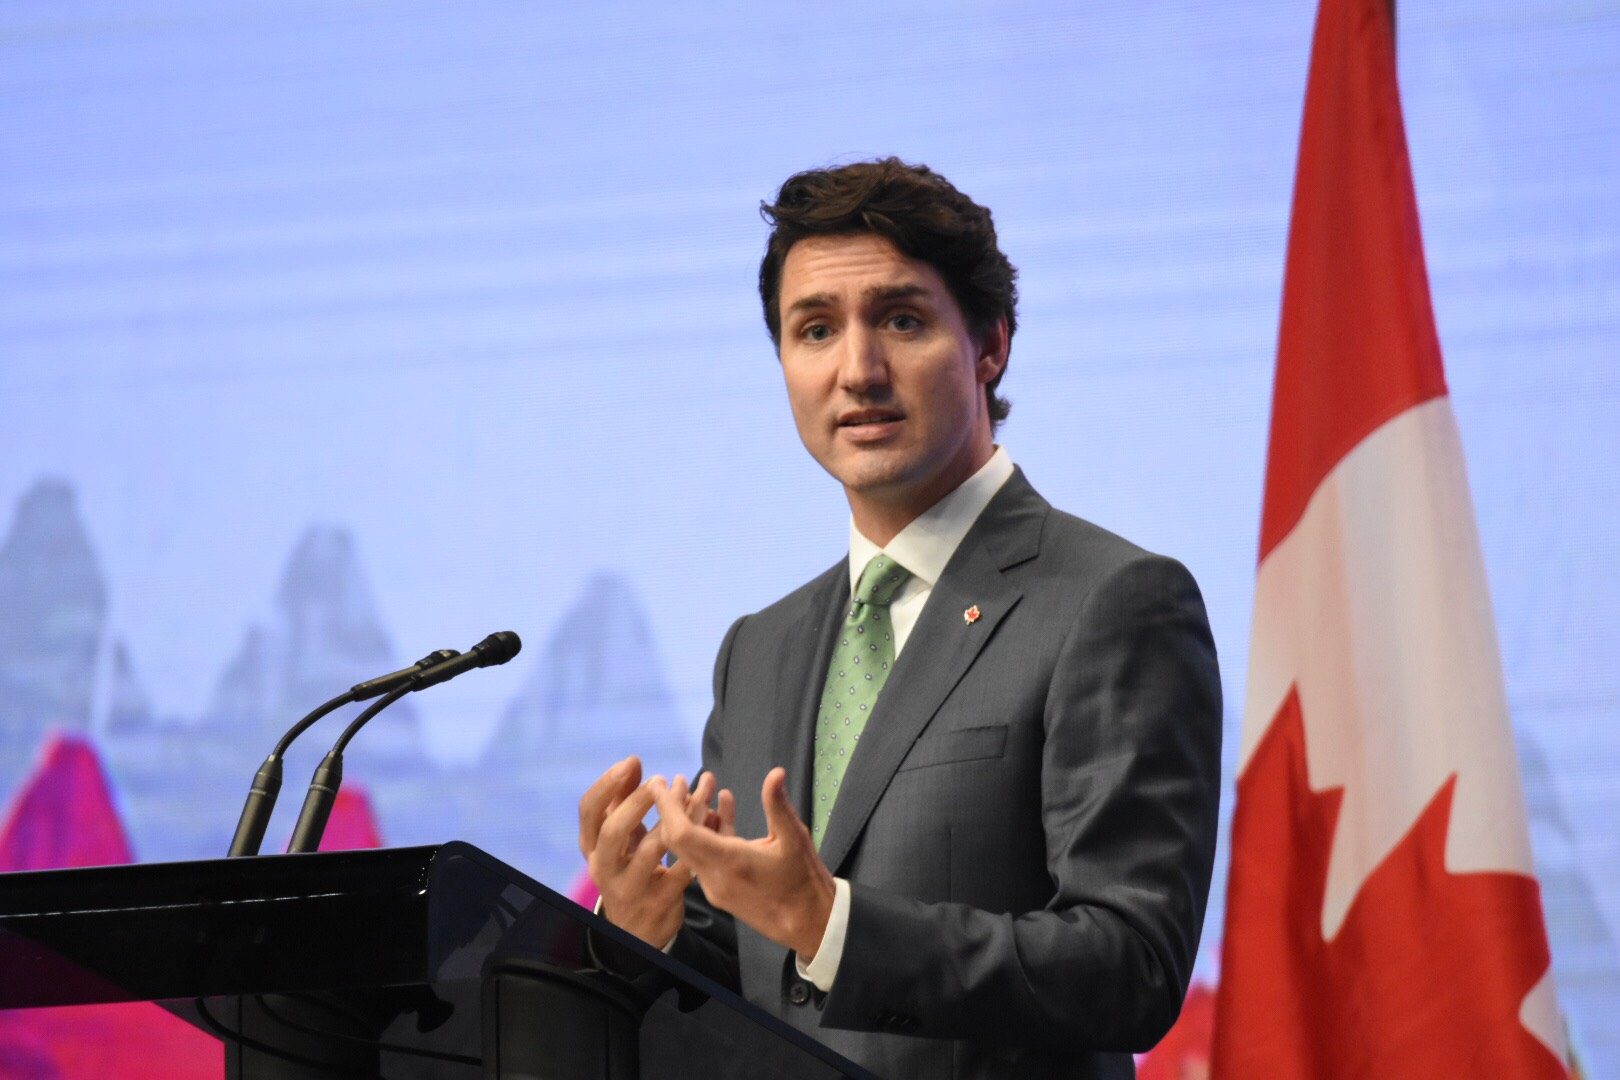 Trudeau says ‘now theoretically possible to get back’ Canada trash in PH